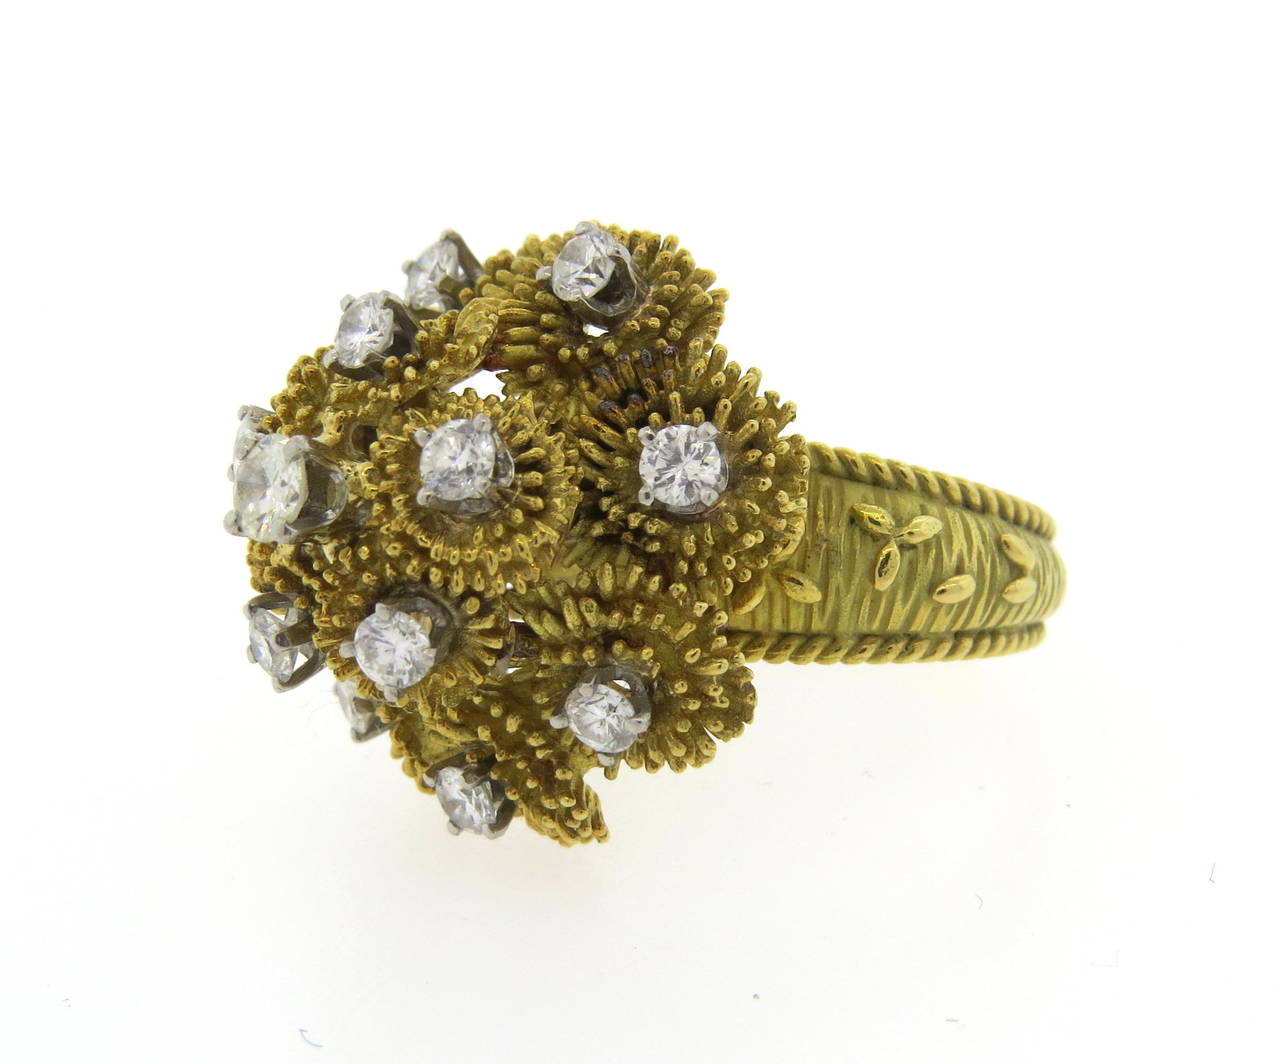 Circa 1970s large 18k yellow gold ring set with approximately 1.50ctw diamonds VS-Clarity , G/H - color. The top of the ring is 23mm in diameter, sits 17mm high from the finger. Finger size 7 3/4, weight -15.3g. Marked: TLI 18k.